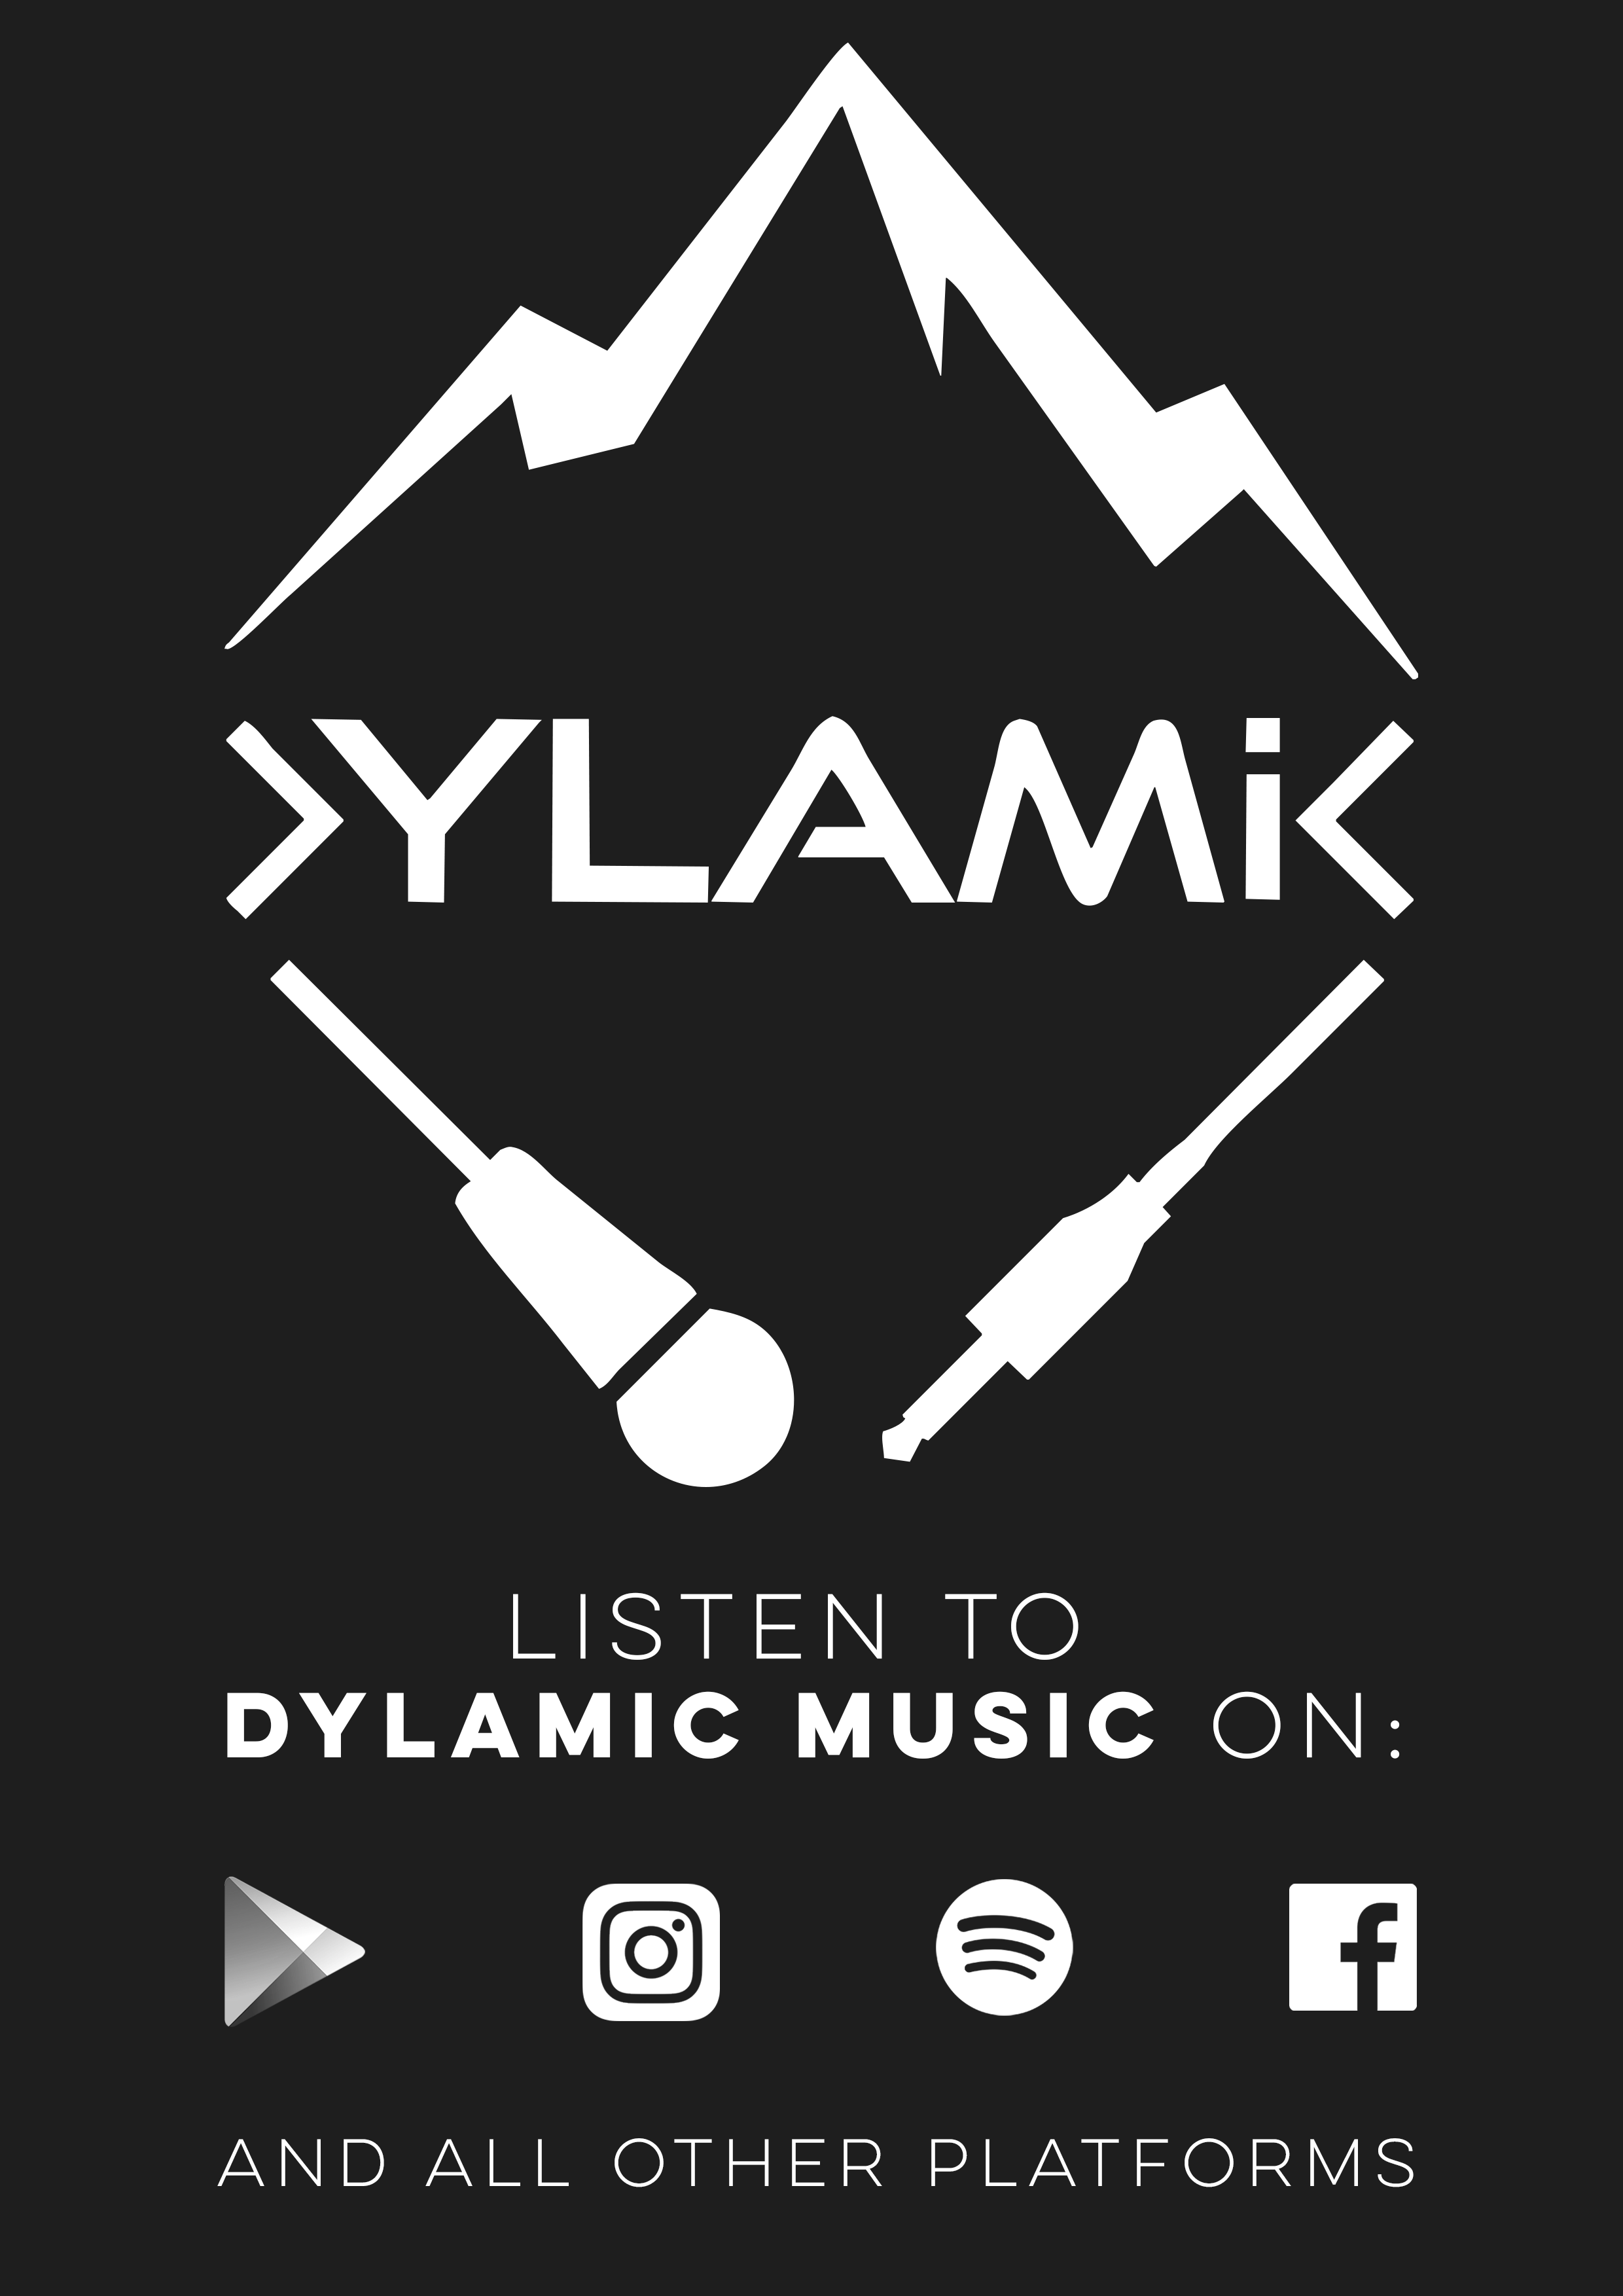 Dylamic